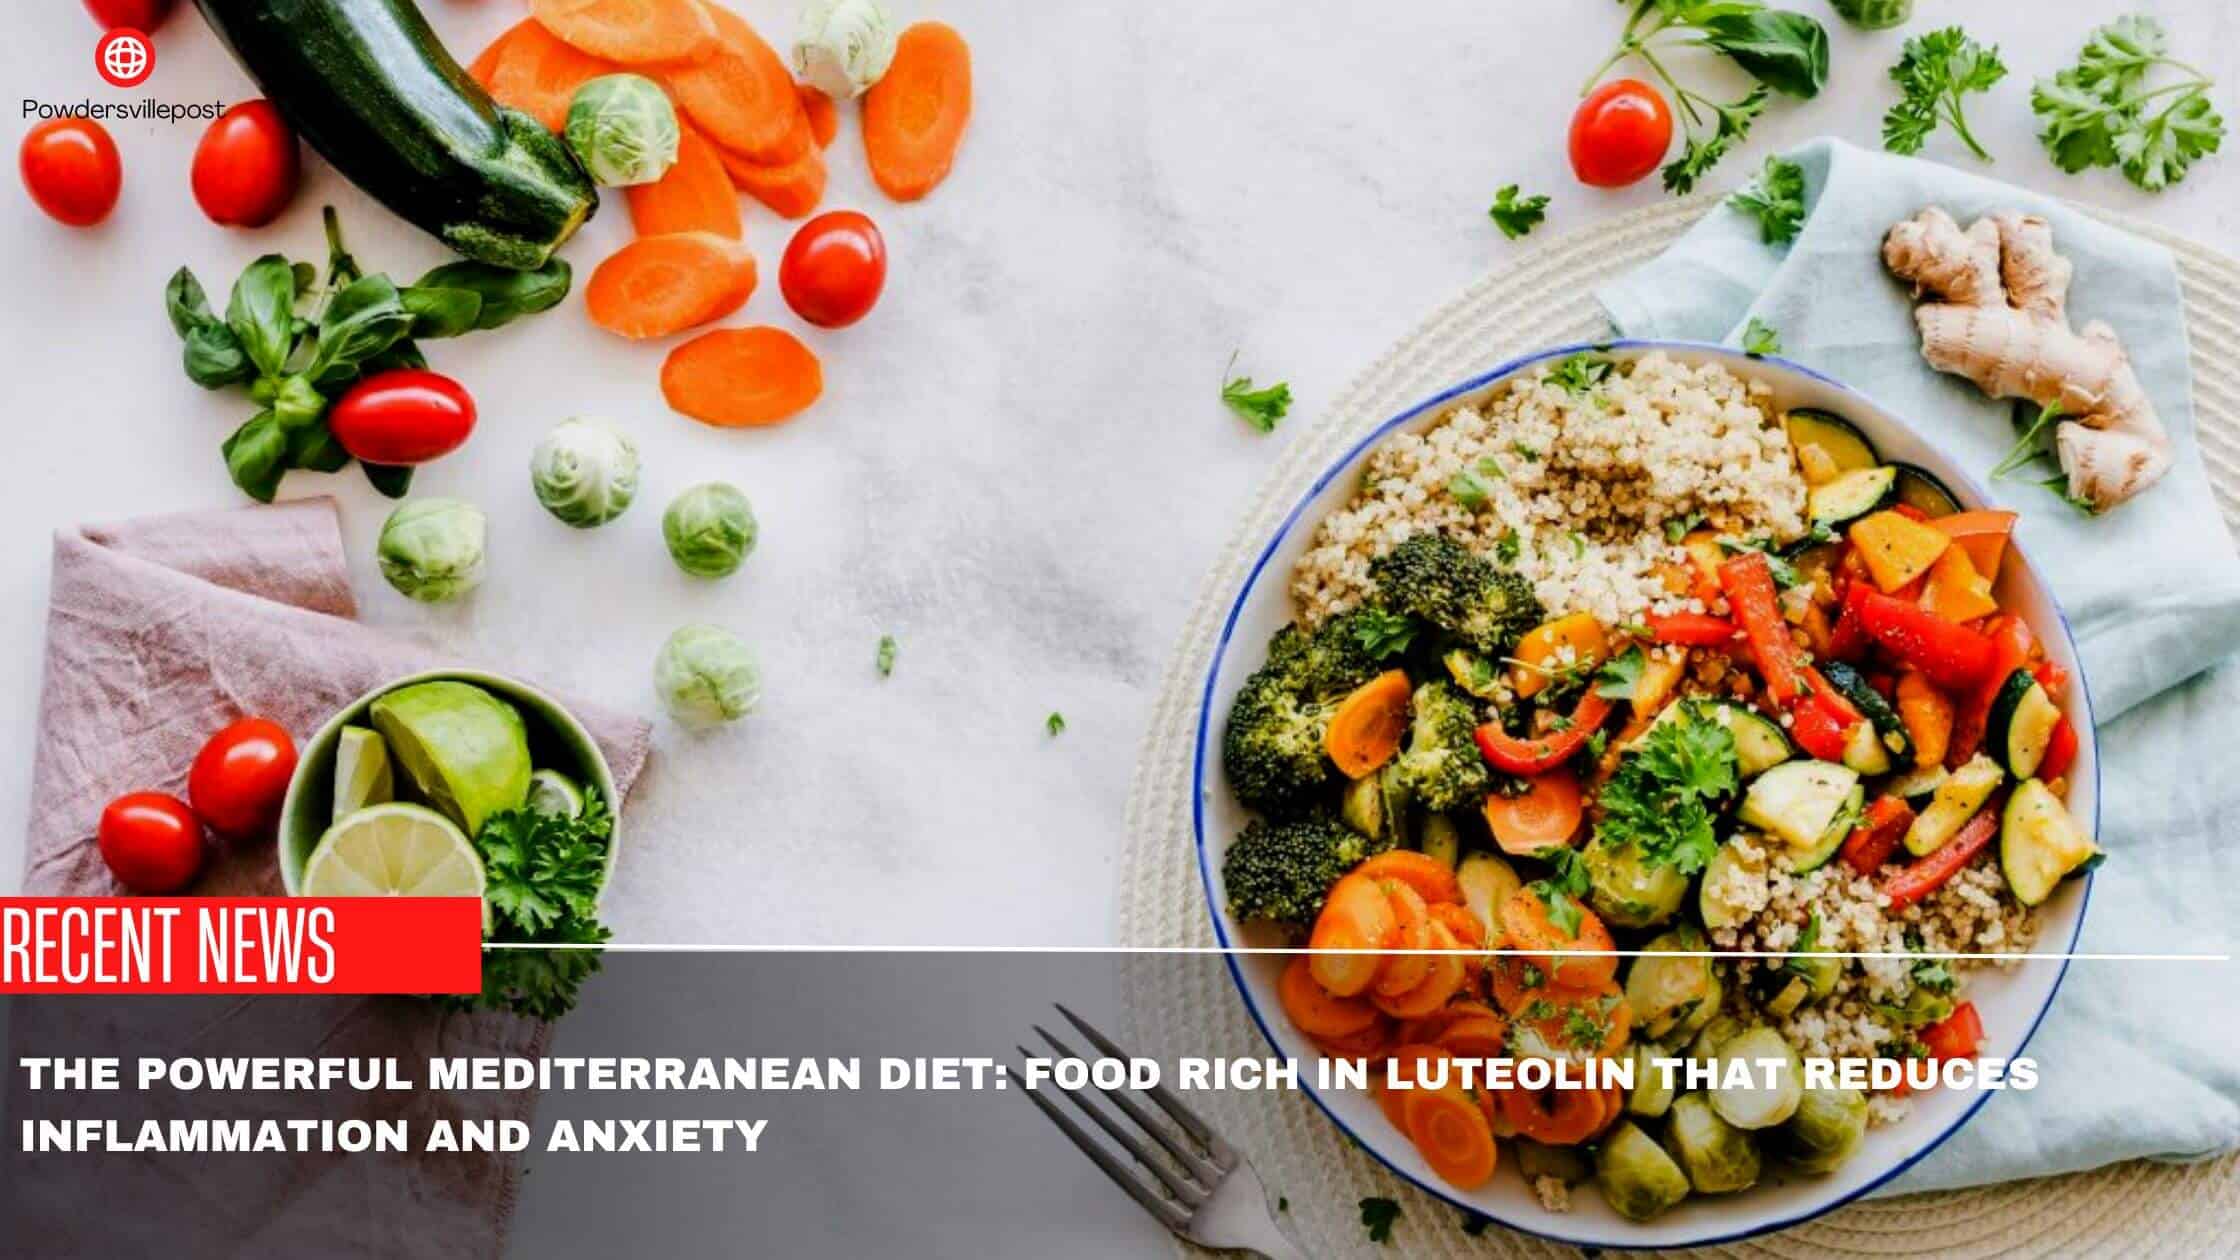 The Powerful Mediterranean Diet Food Rich In Luteolin That Reduces Inflammation And Anxiety